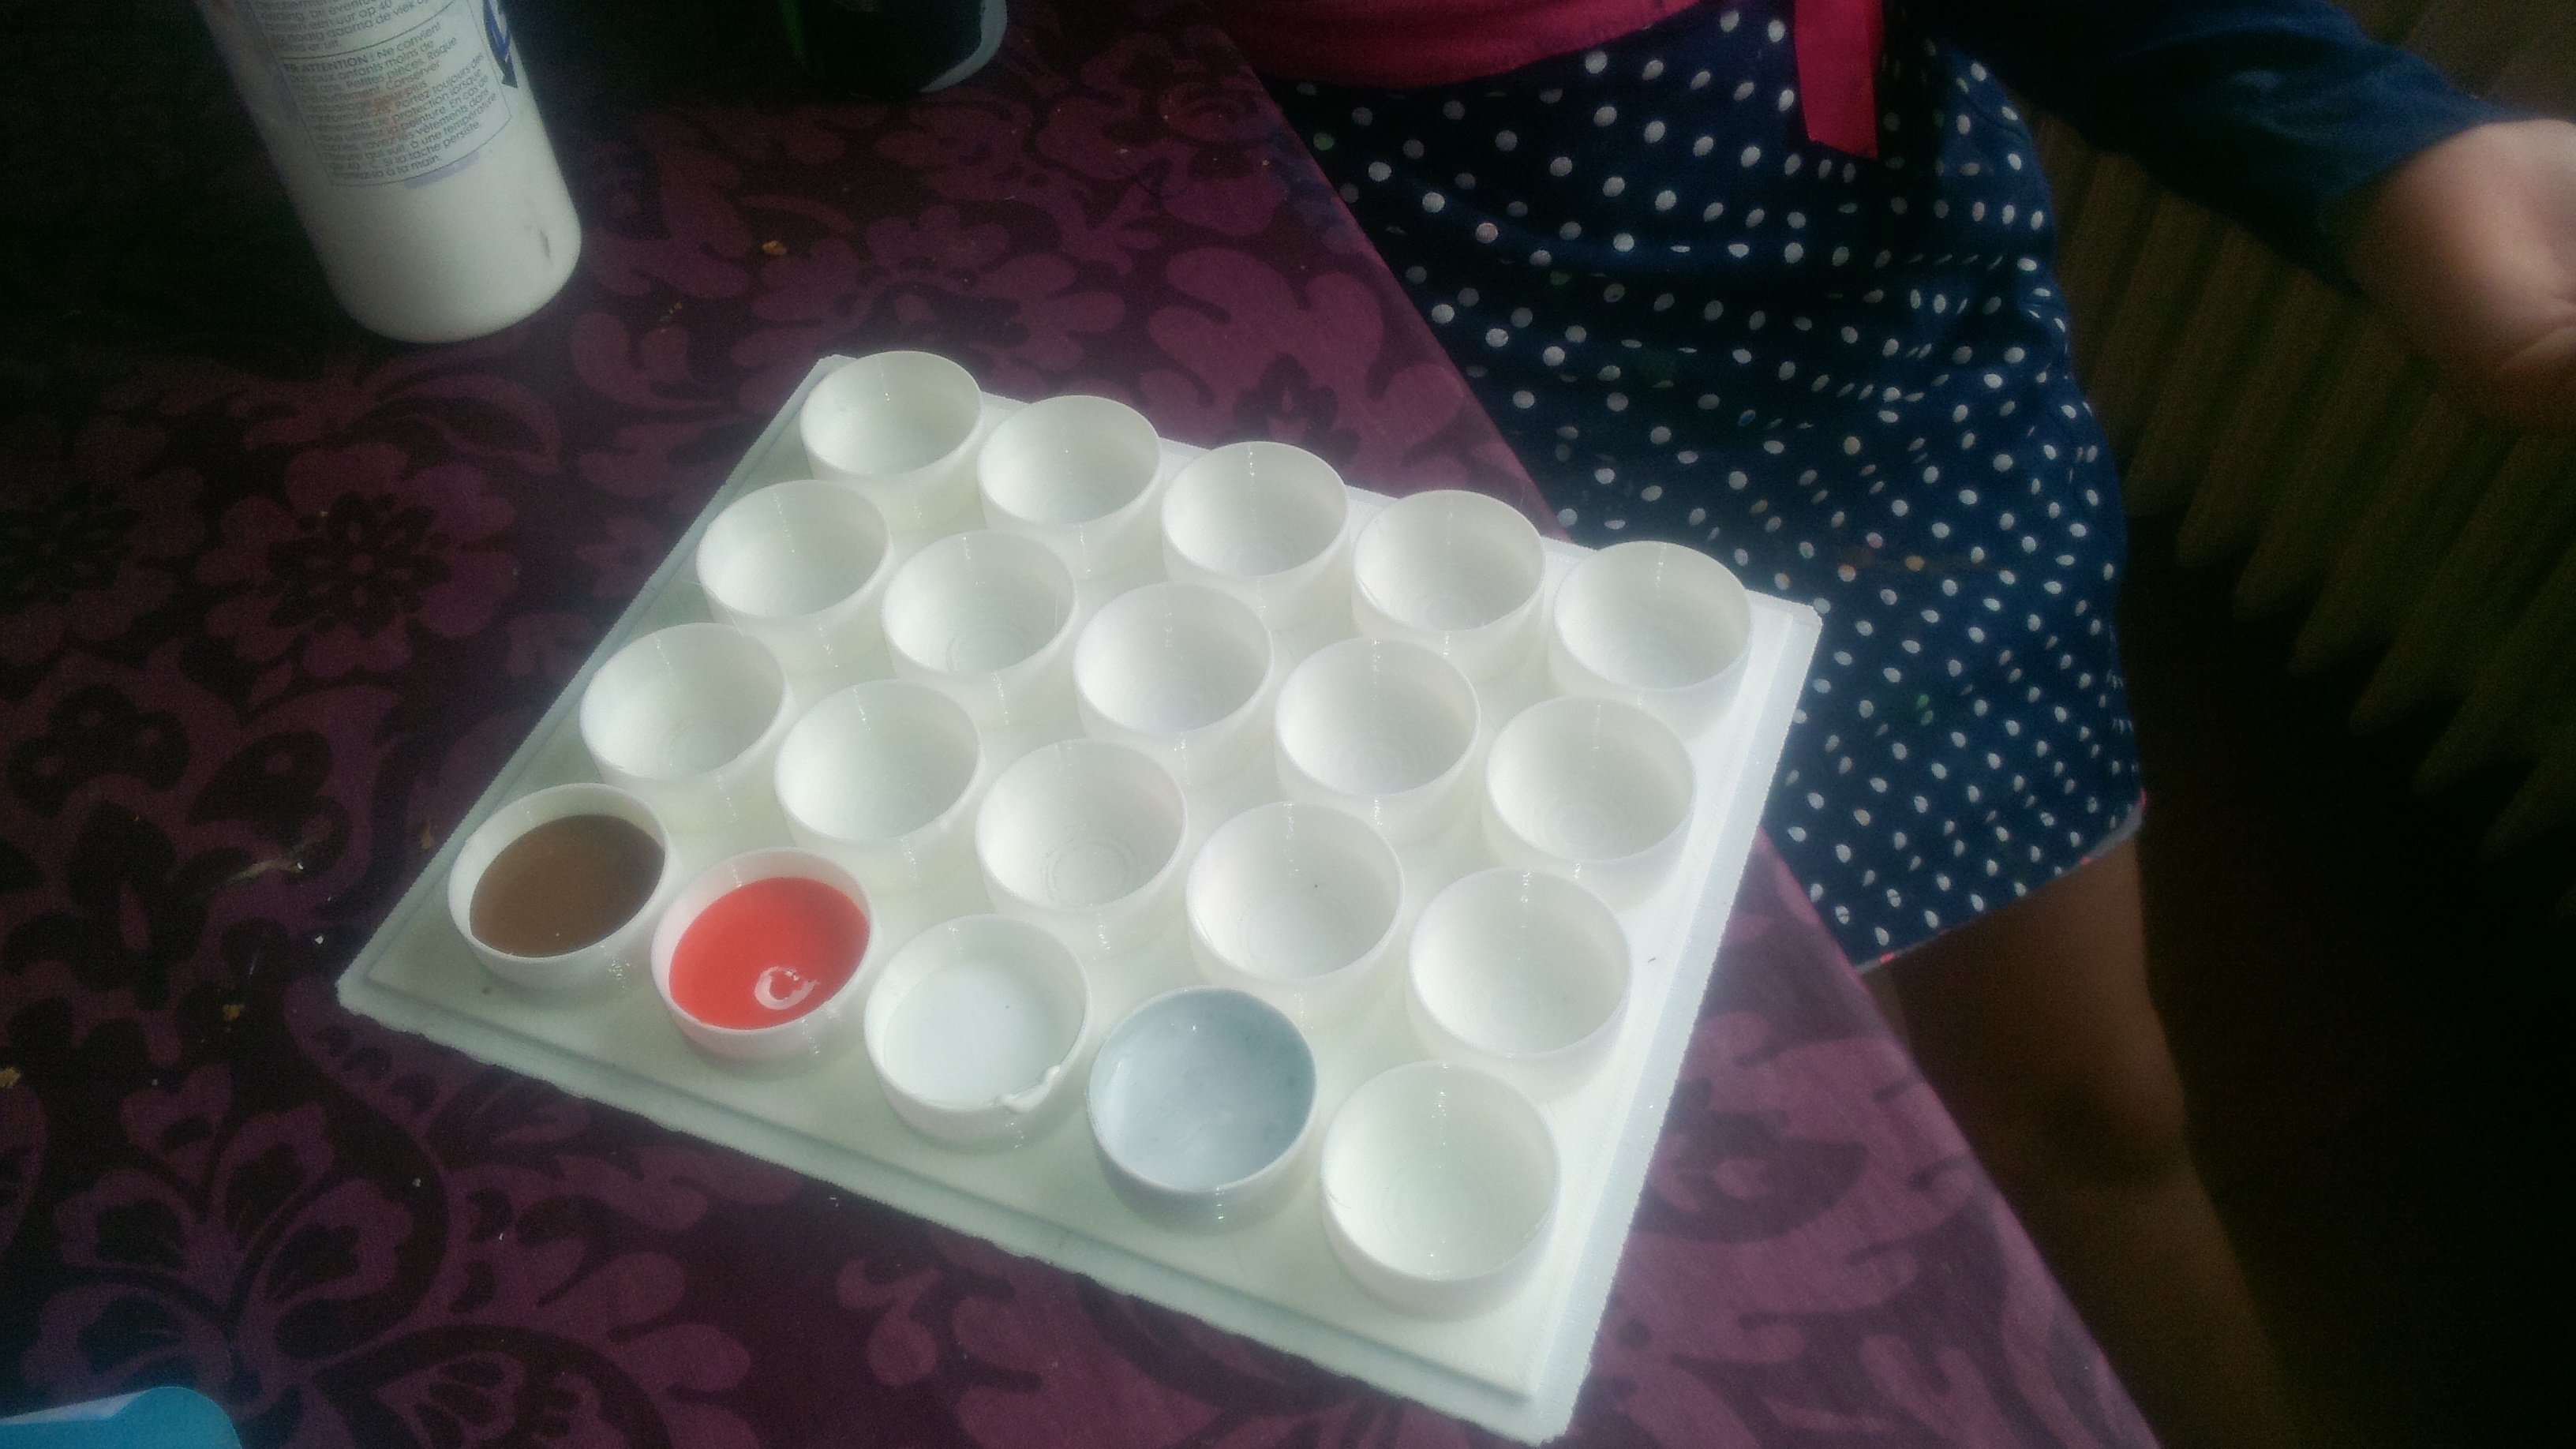 3D Printed Paint Tray ____ each tray will individually be sealed by mvs